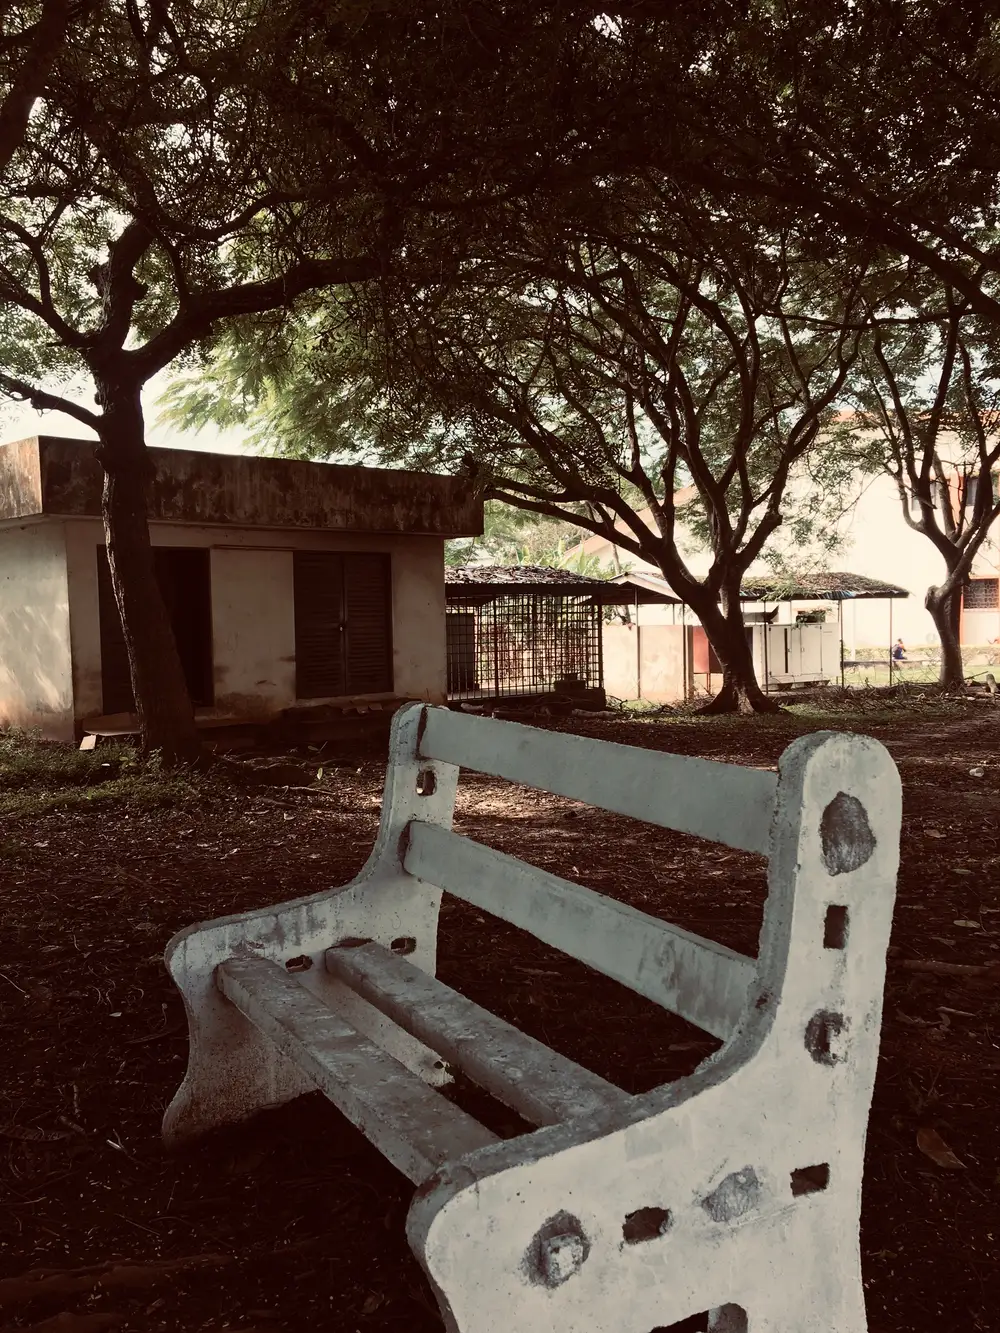 White chair under some trees